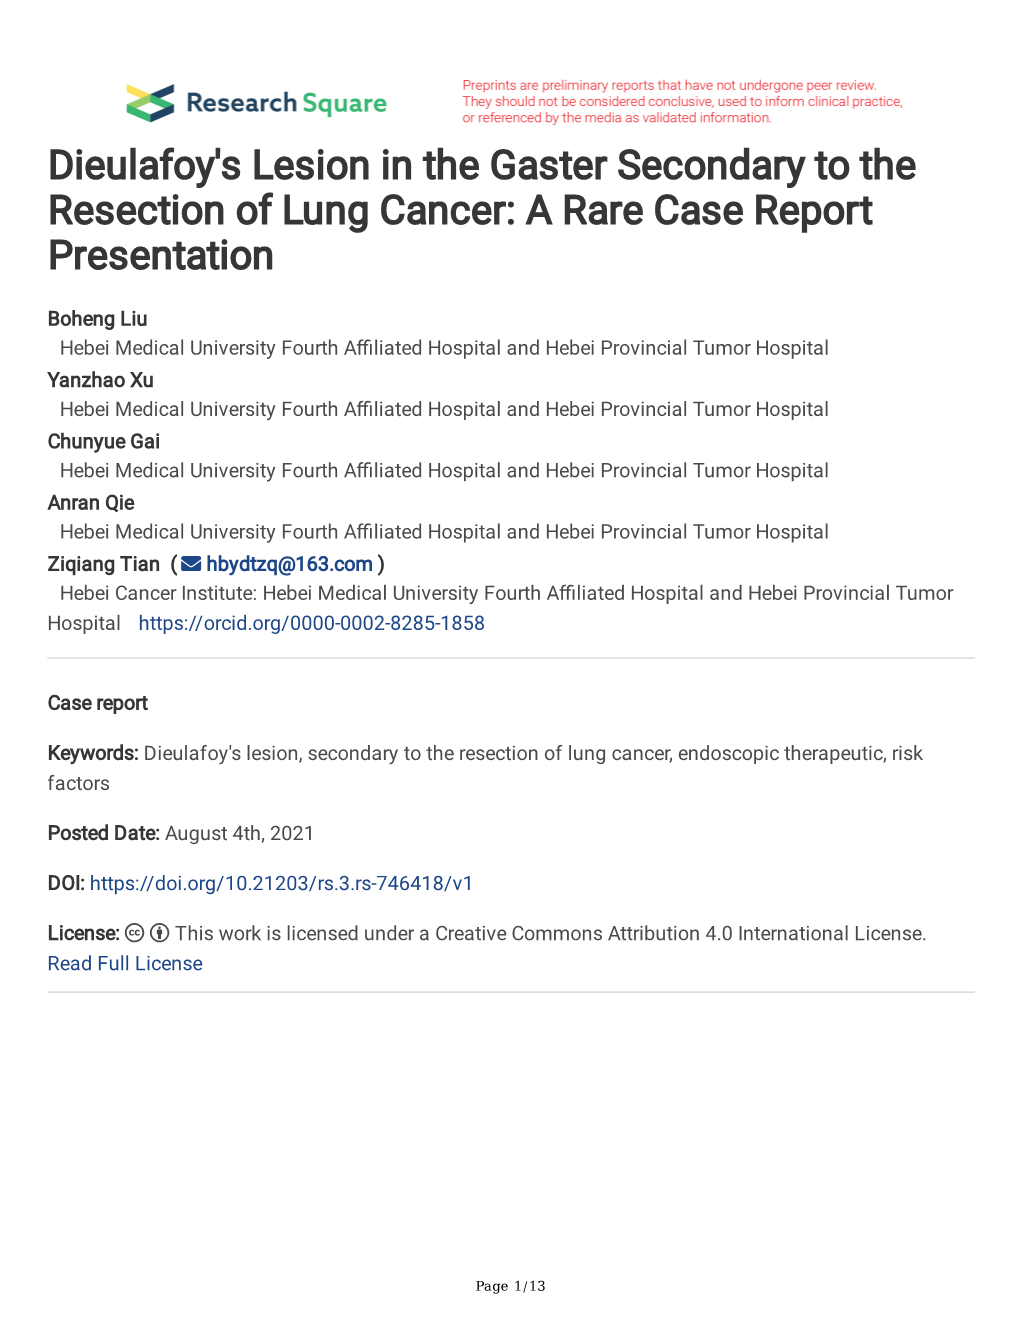 Dieulafoy's Lesion in the Gaster Secondary to the Resection of Lung Cancer: a Rare Case Report Presentation